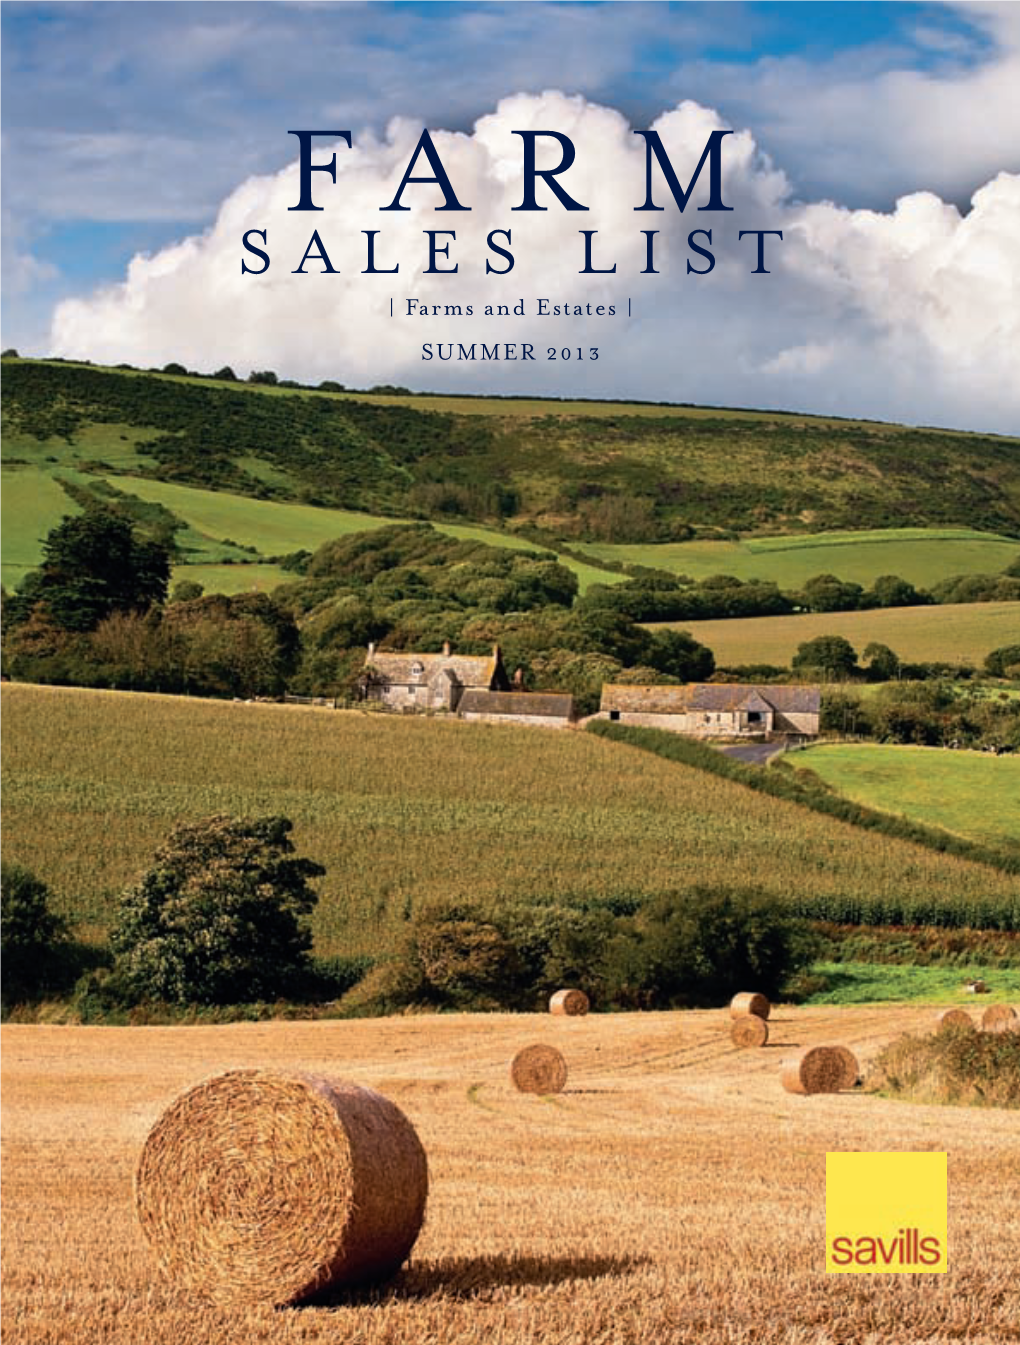 SALES LIST | Farms and Estates | SUMMER 2013